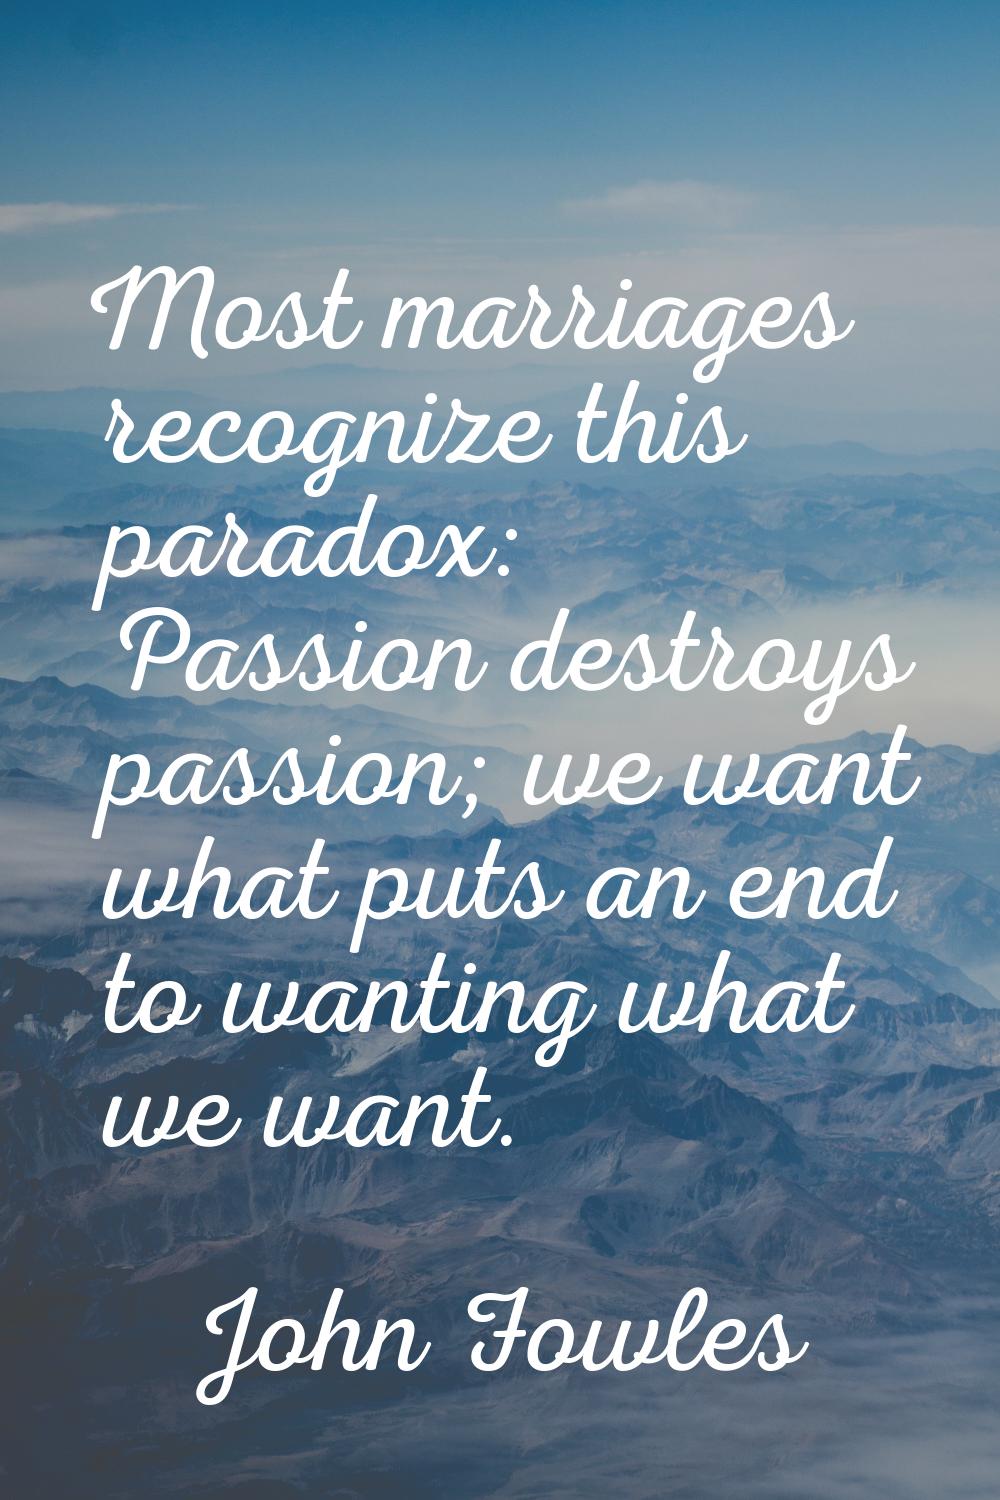 Most marriages recognize this paradox: Passion destroys passion; we want what puts an end to wantin